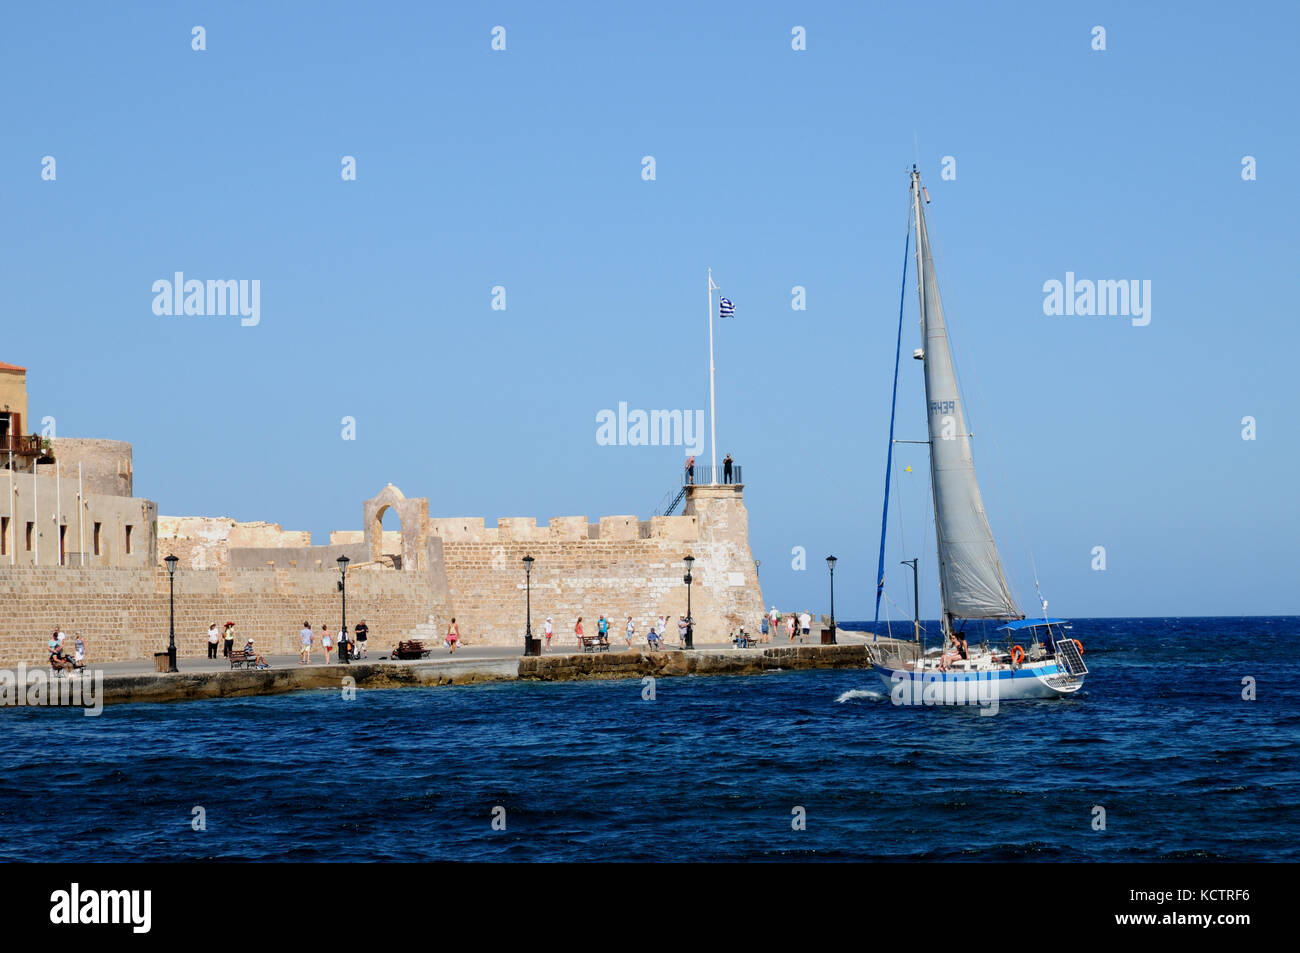 A sailing boat at the entrance to the Venetian Harbour in the Cretan town of Chania. Stock Photo